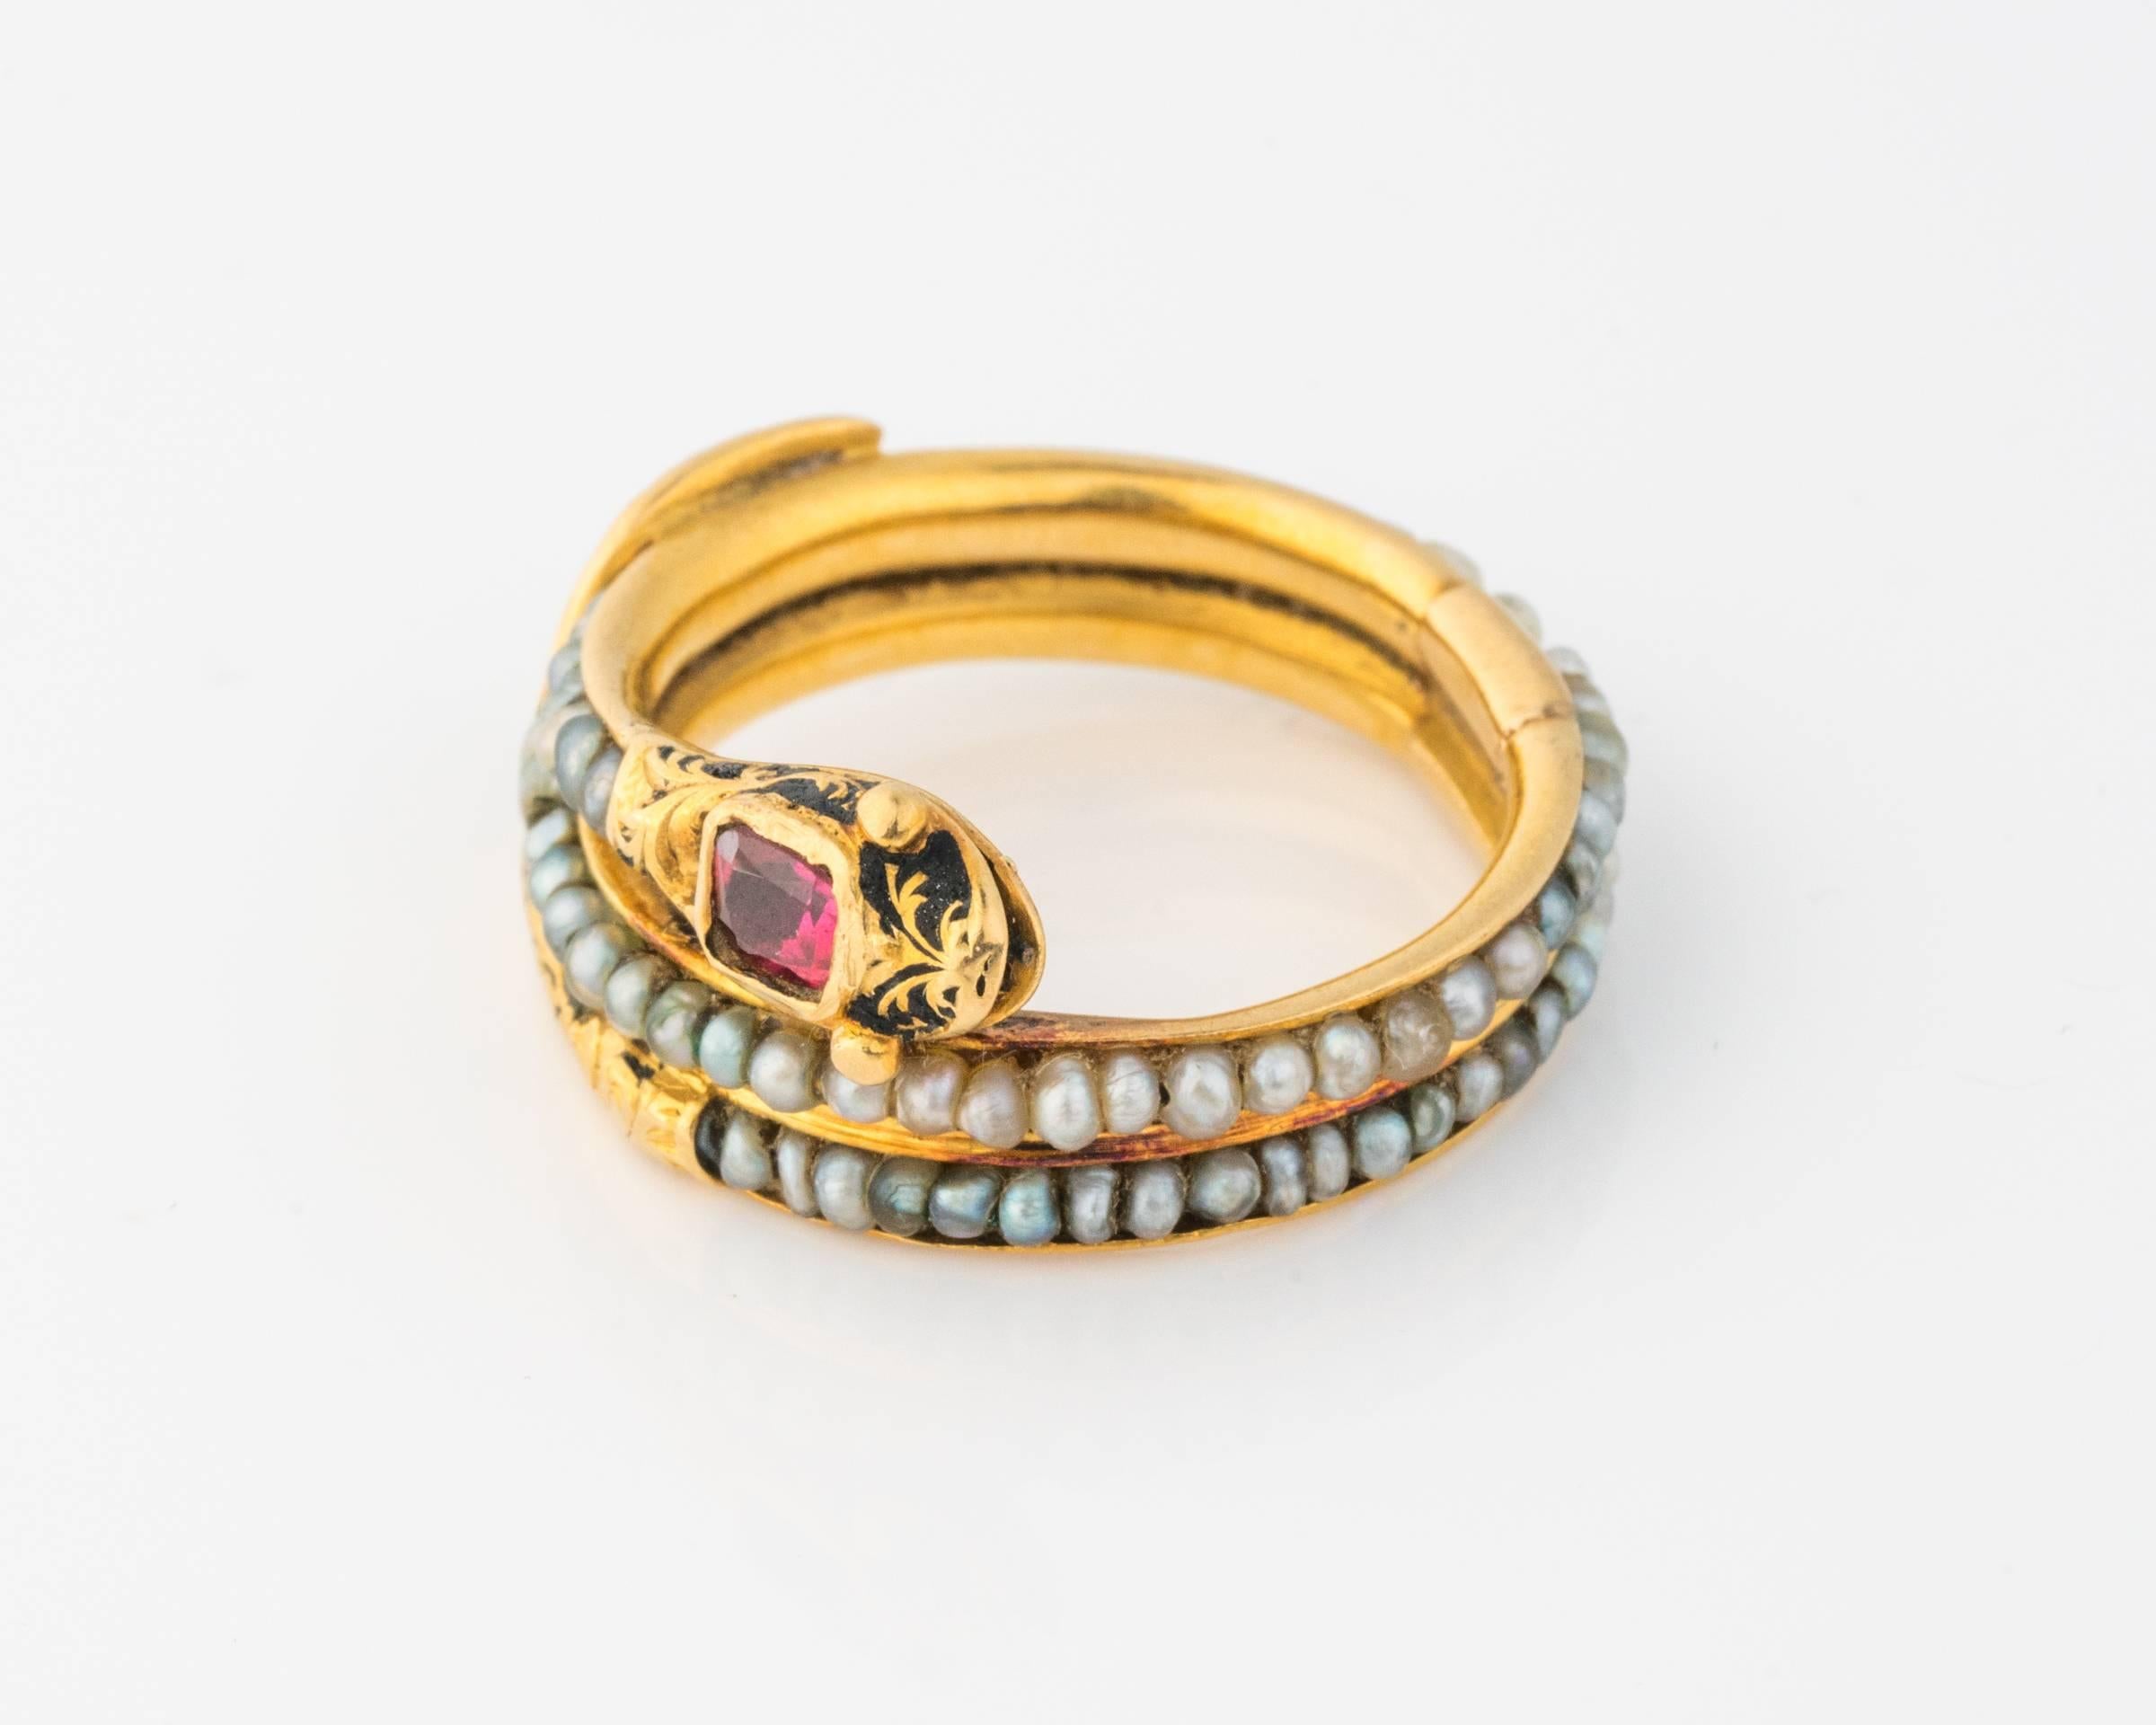 Victorian Era Mourning Serpent Gold Ring Featuring Ruby and Seed Pearls 1